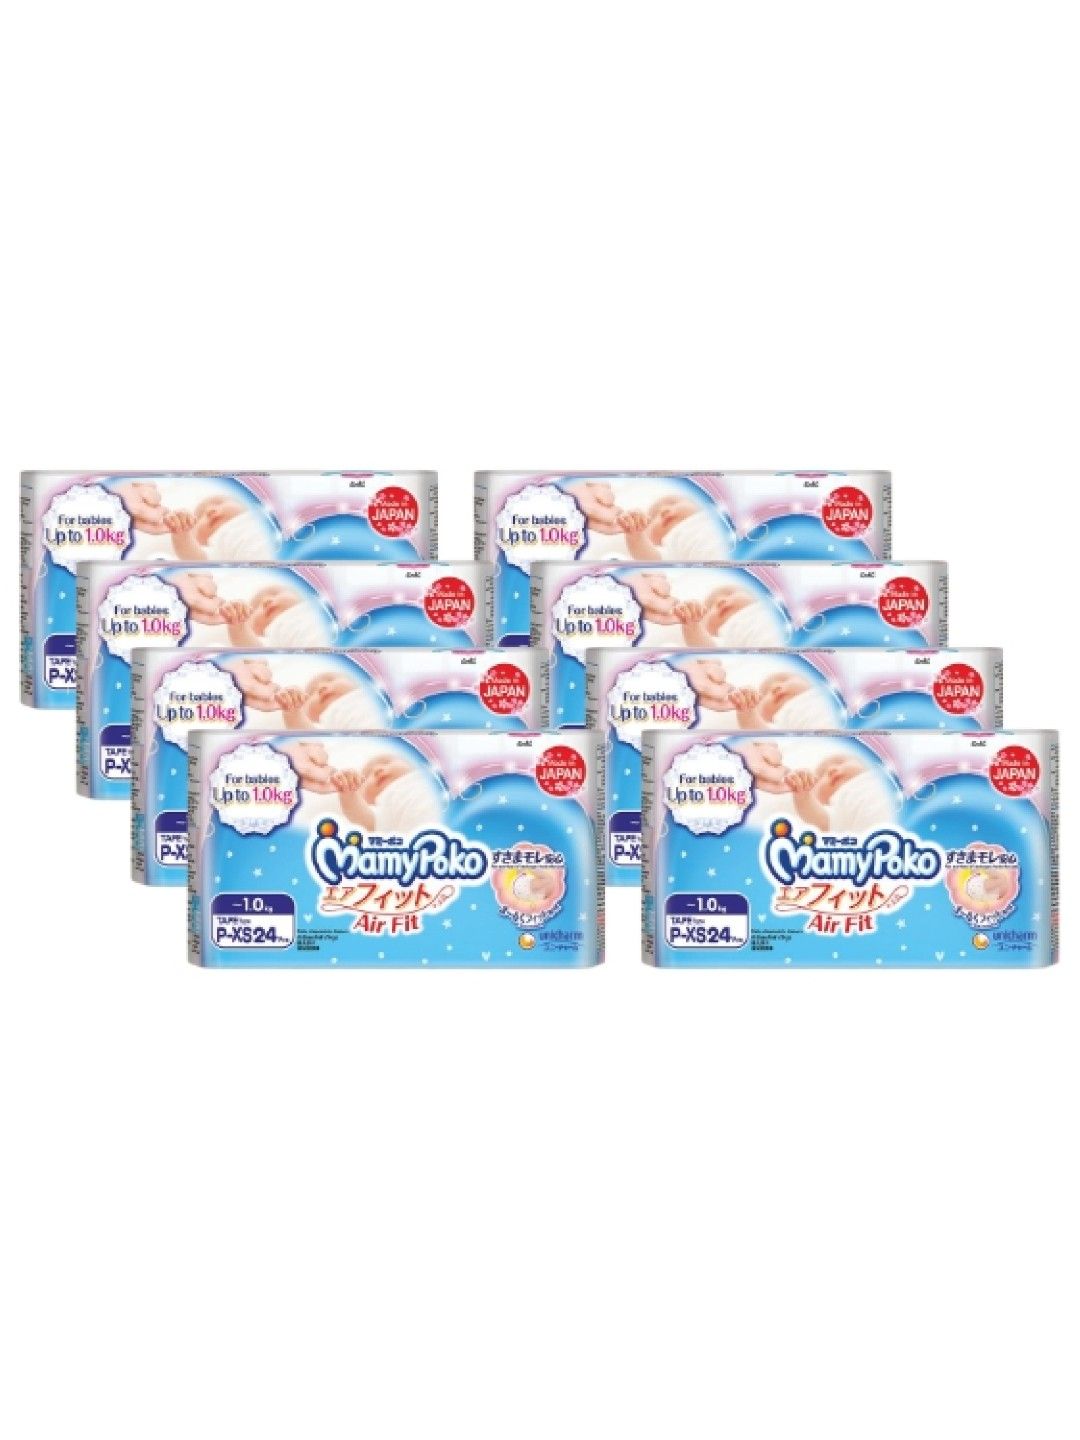 Mamy Poko Pants Small size (40 pants) + Extra Care Baby Wipes (80 wipes)